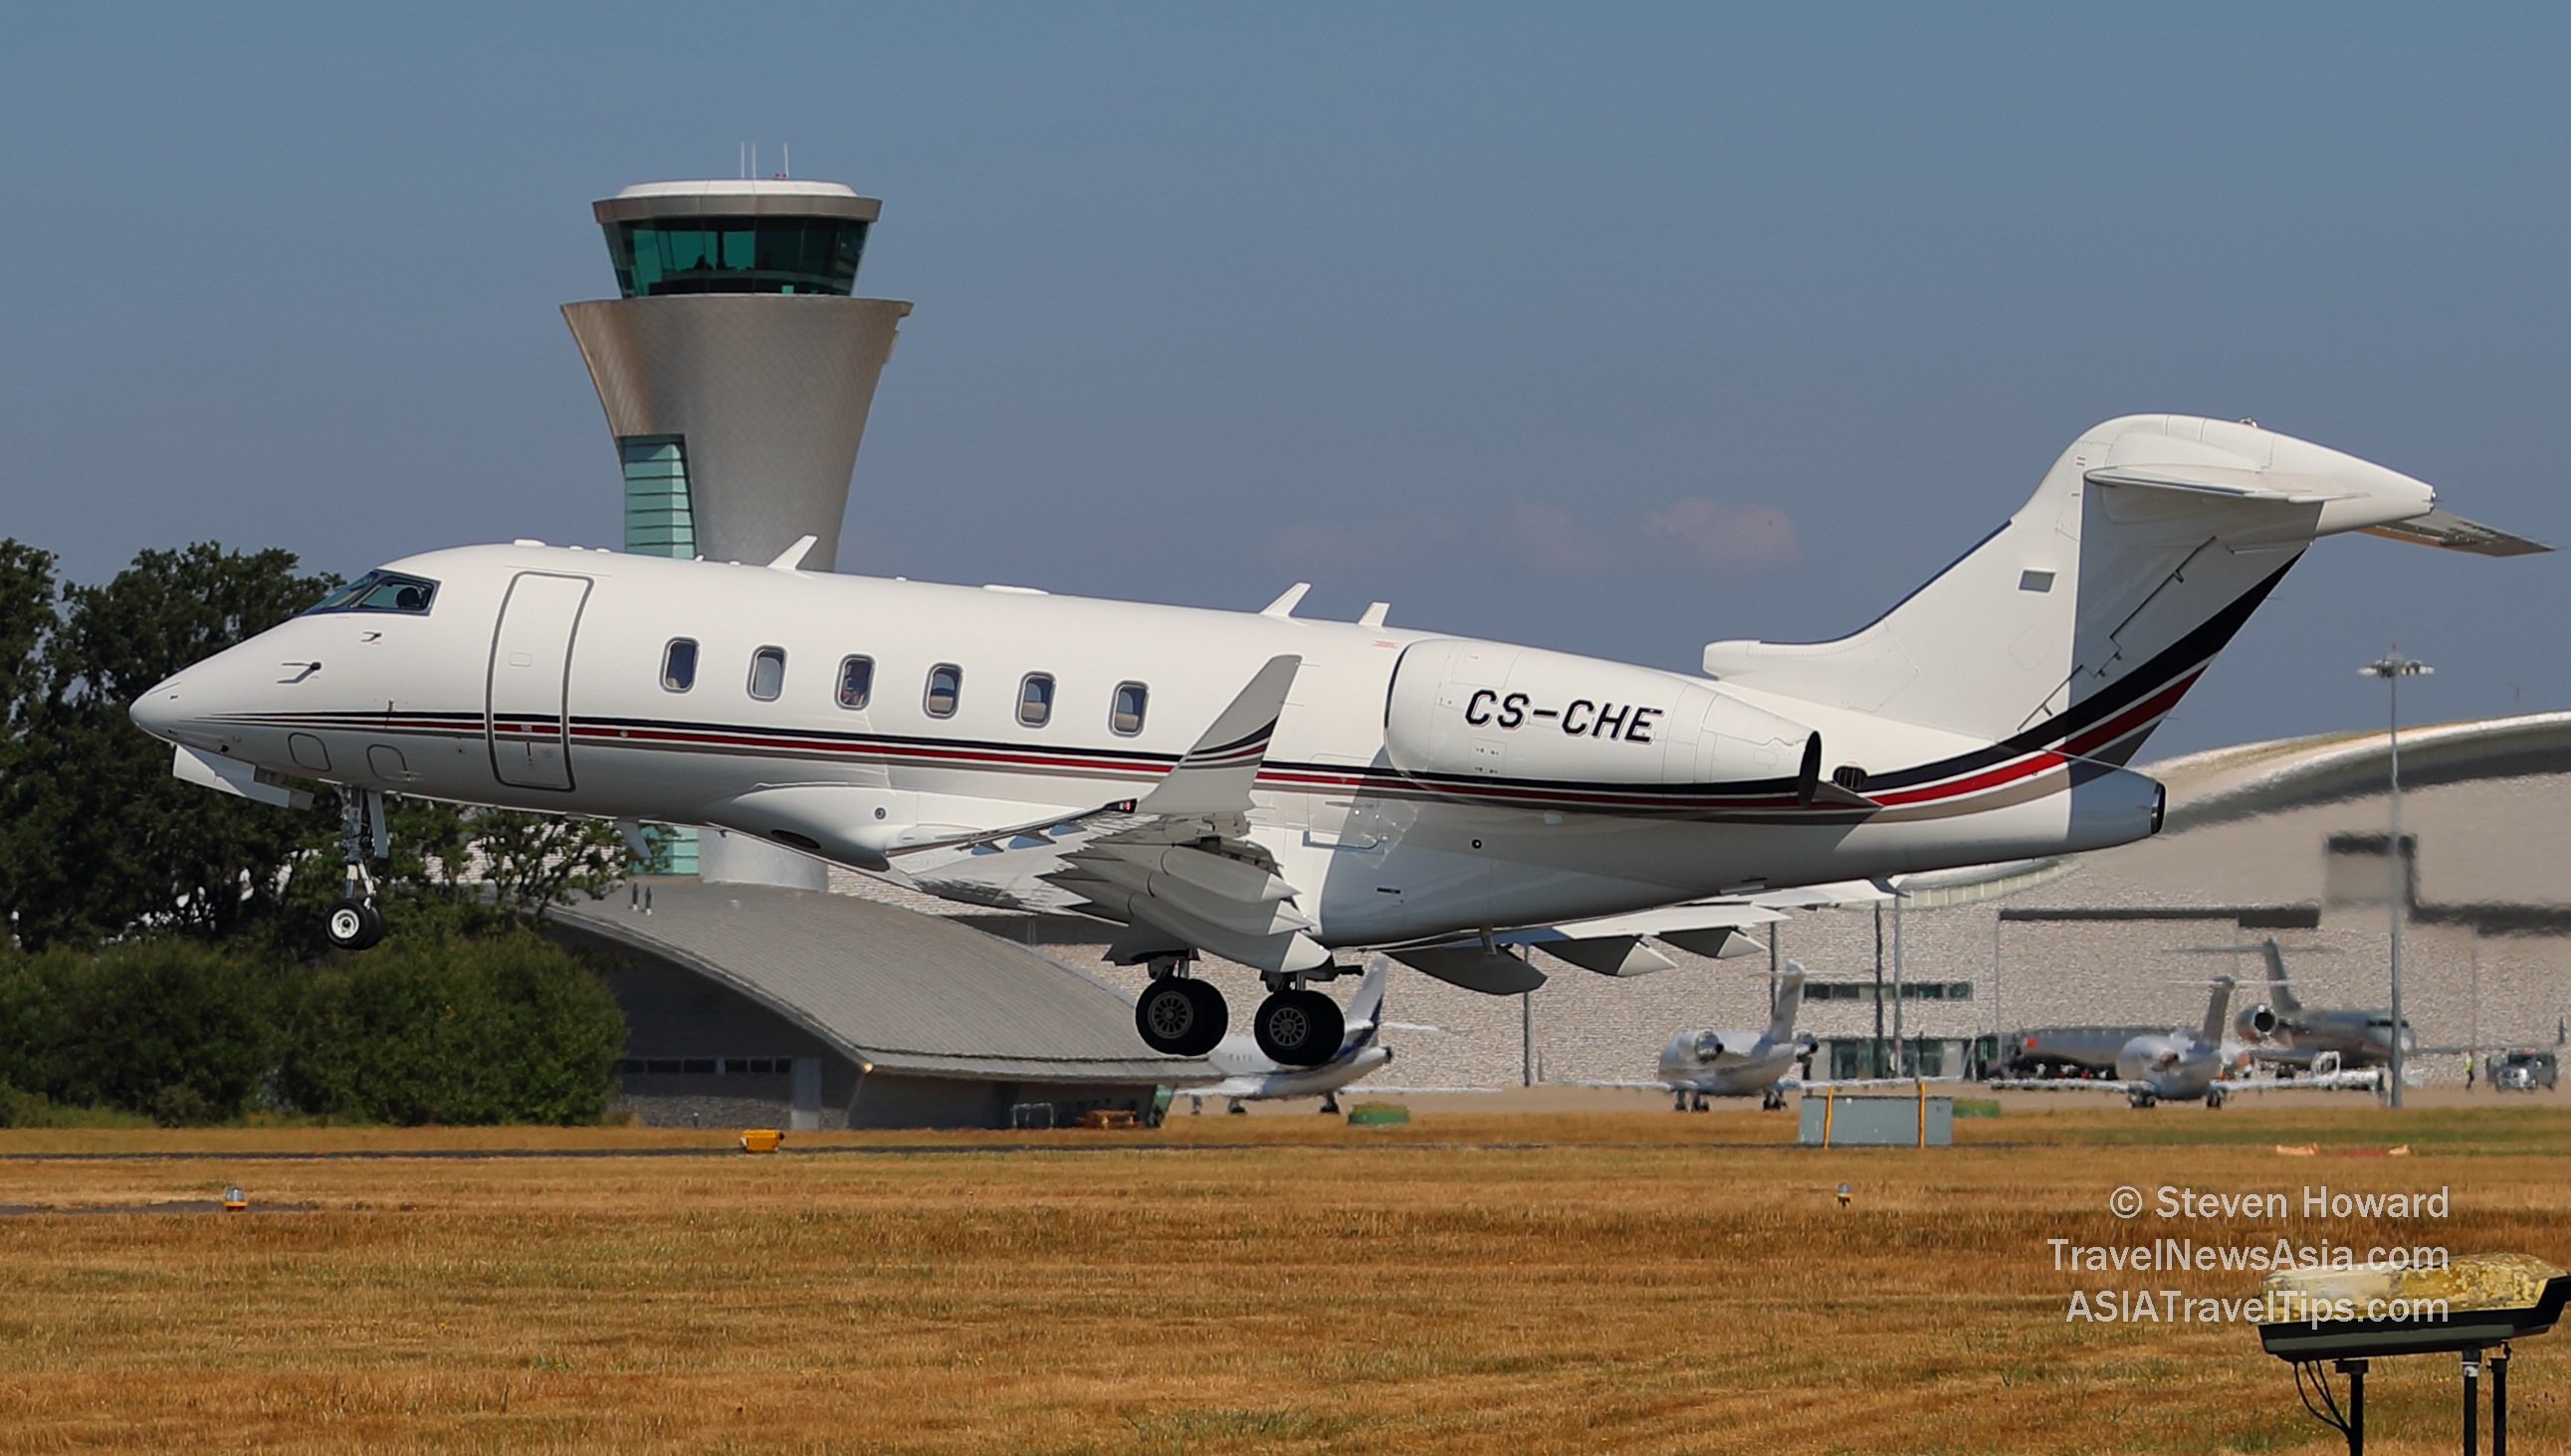 Bombardier Challenger 350. Picture by Steven Howard of TravelNewsAsia.com Click to enlarge.